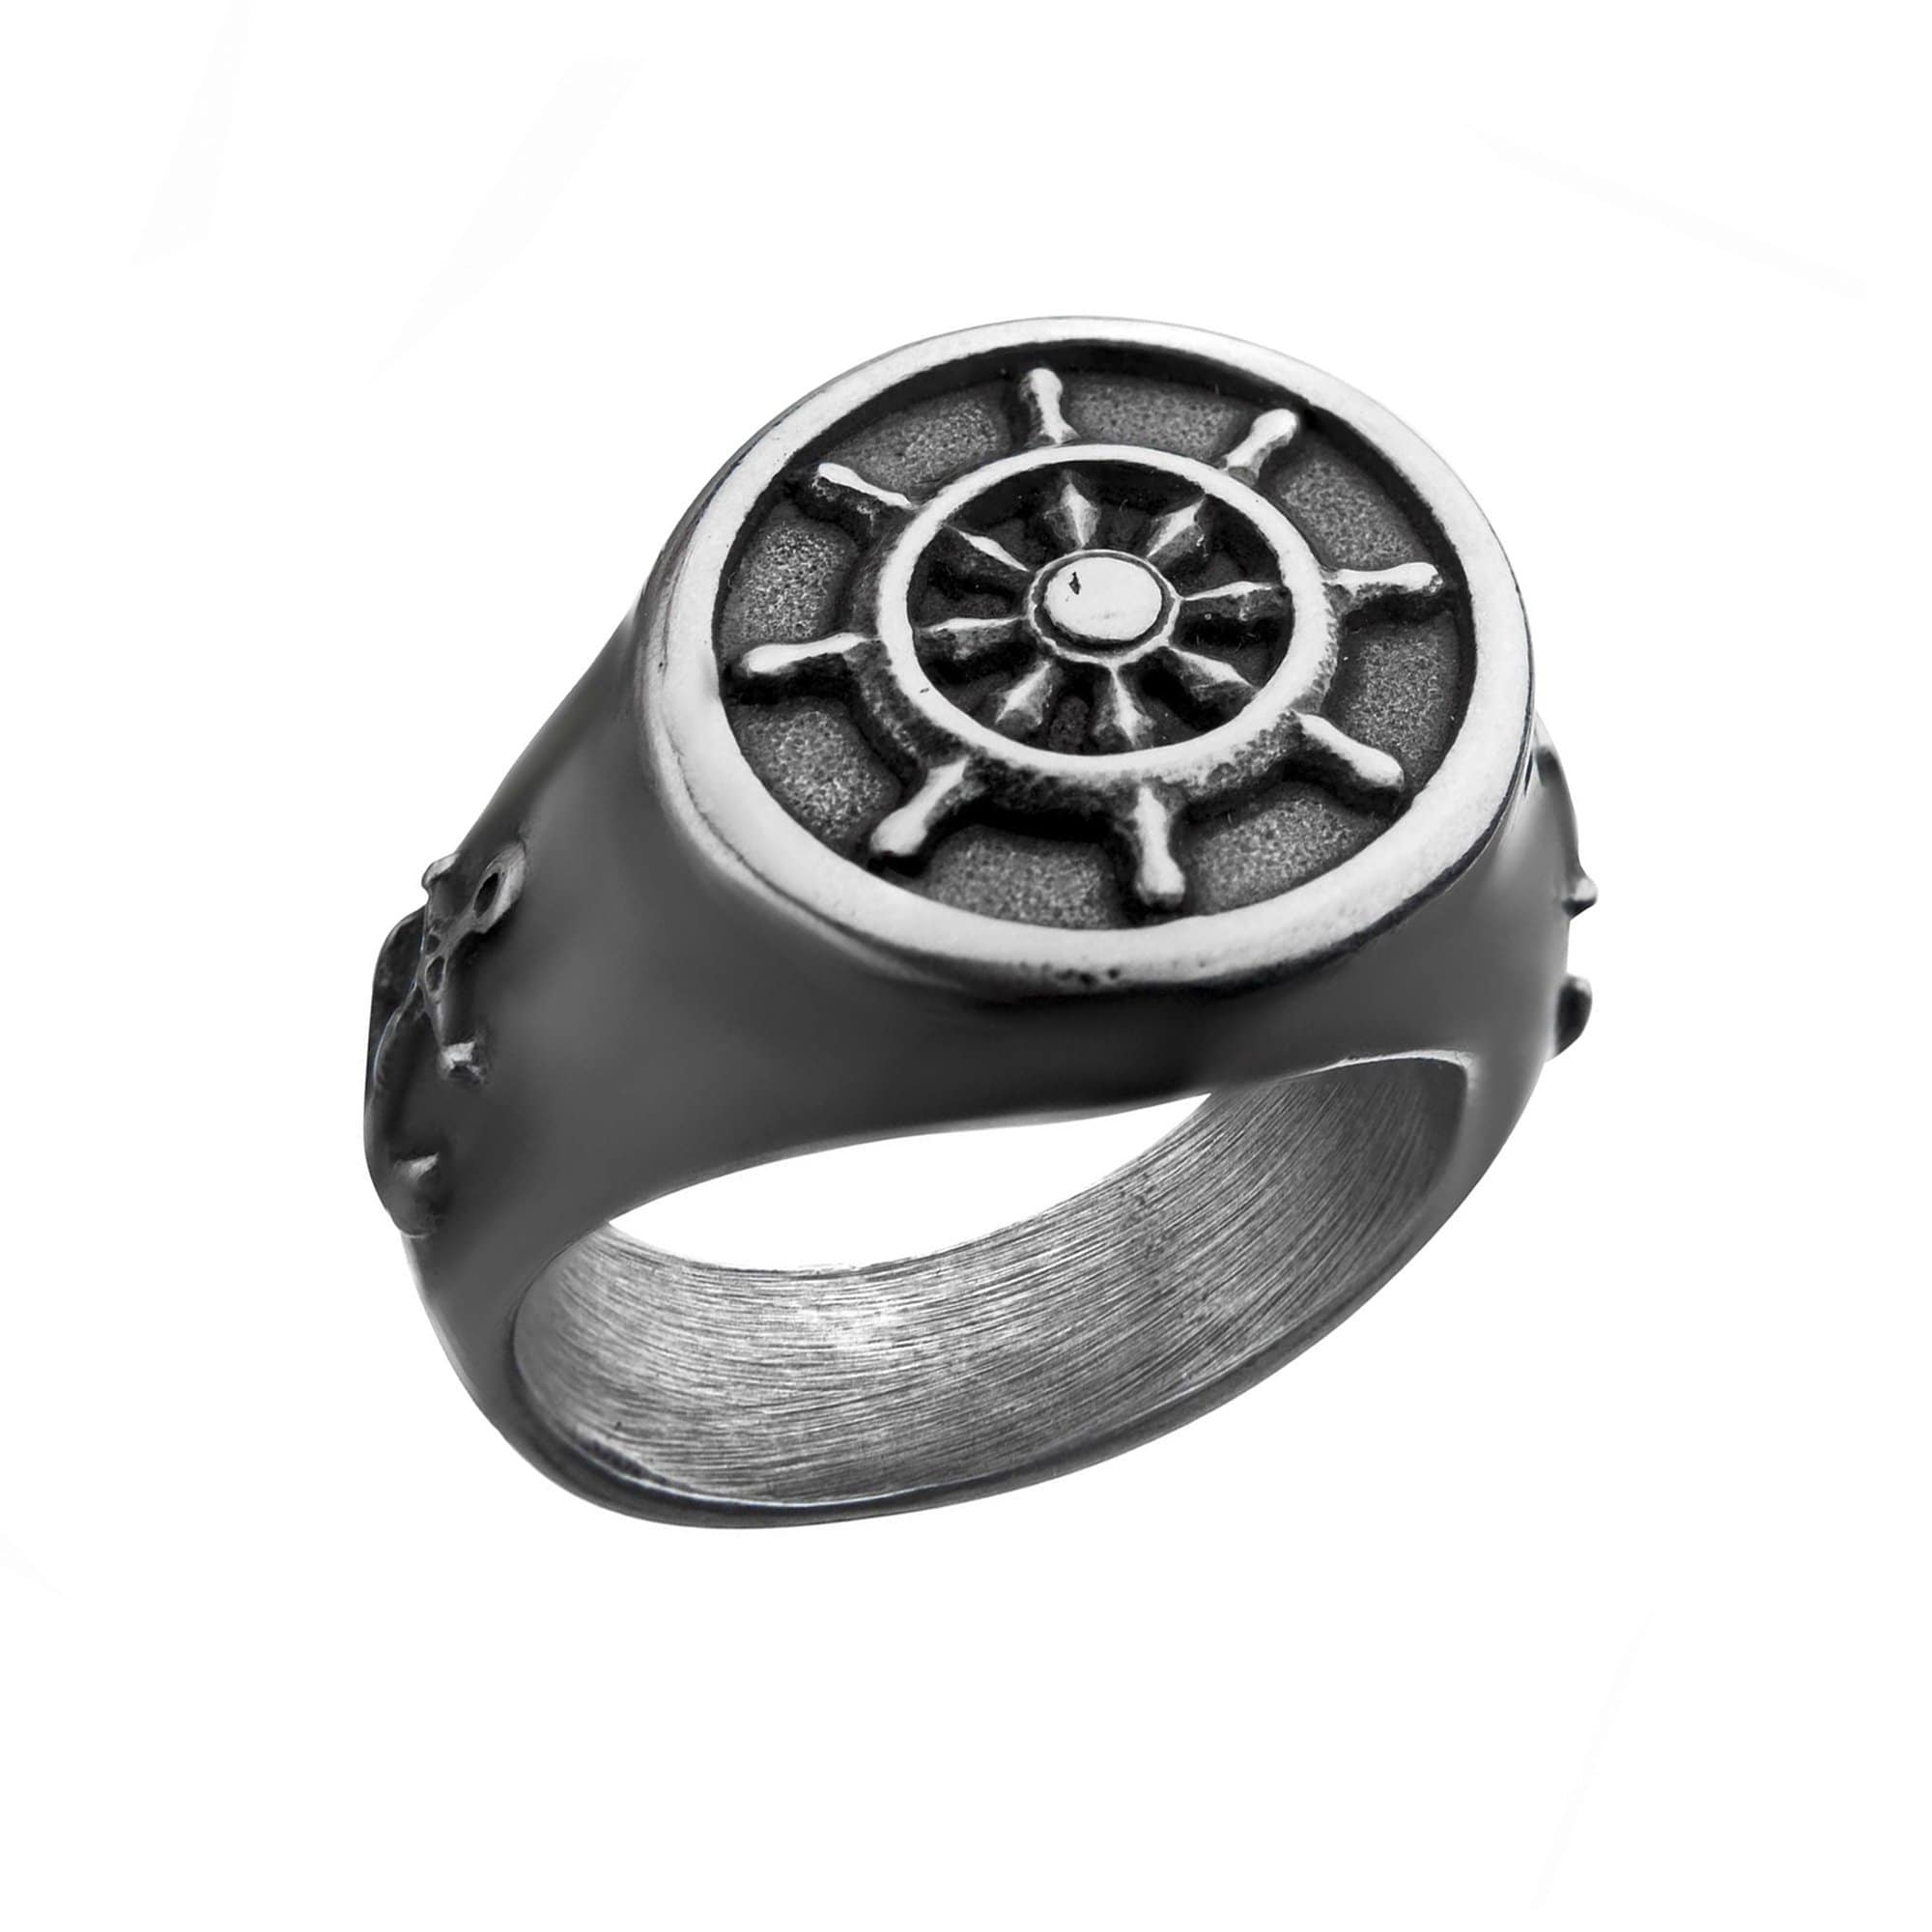 INOX JEWELRY Rings Silver Tone Stainless Steel Oxidized Finish Vintage Anchor and Helm Ring